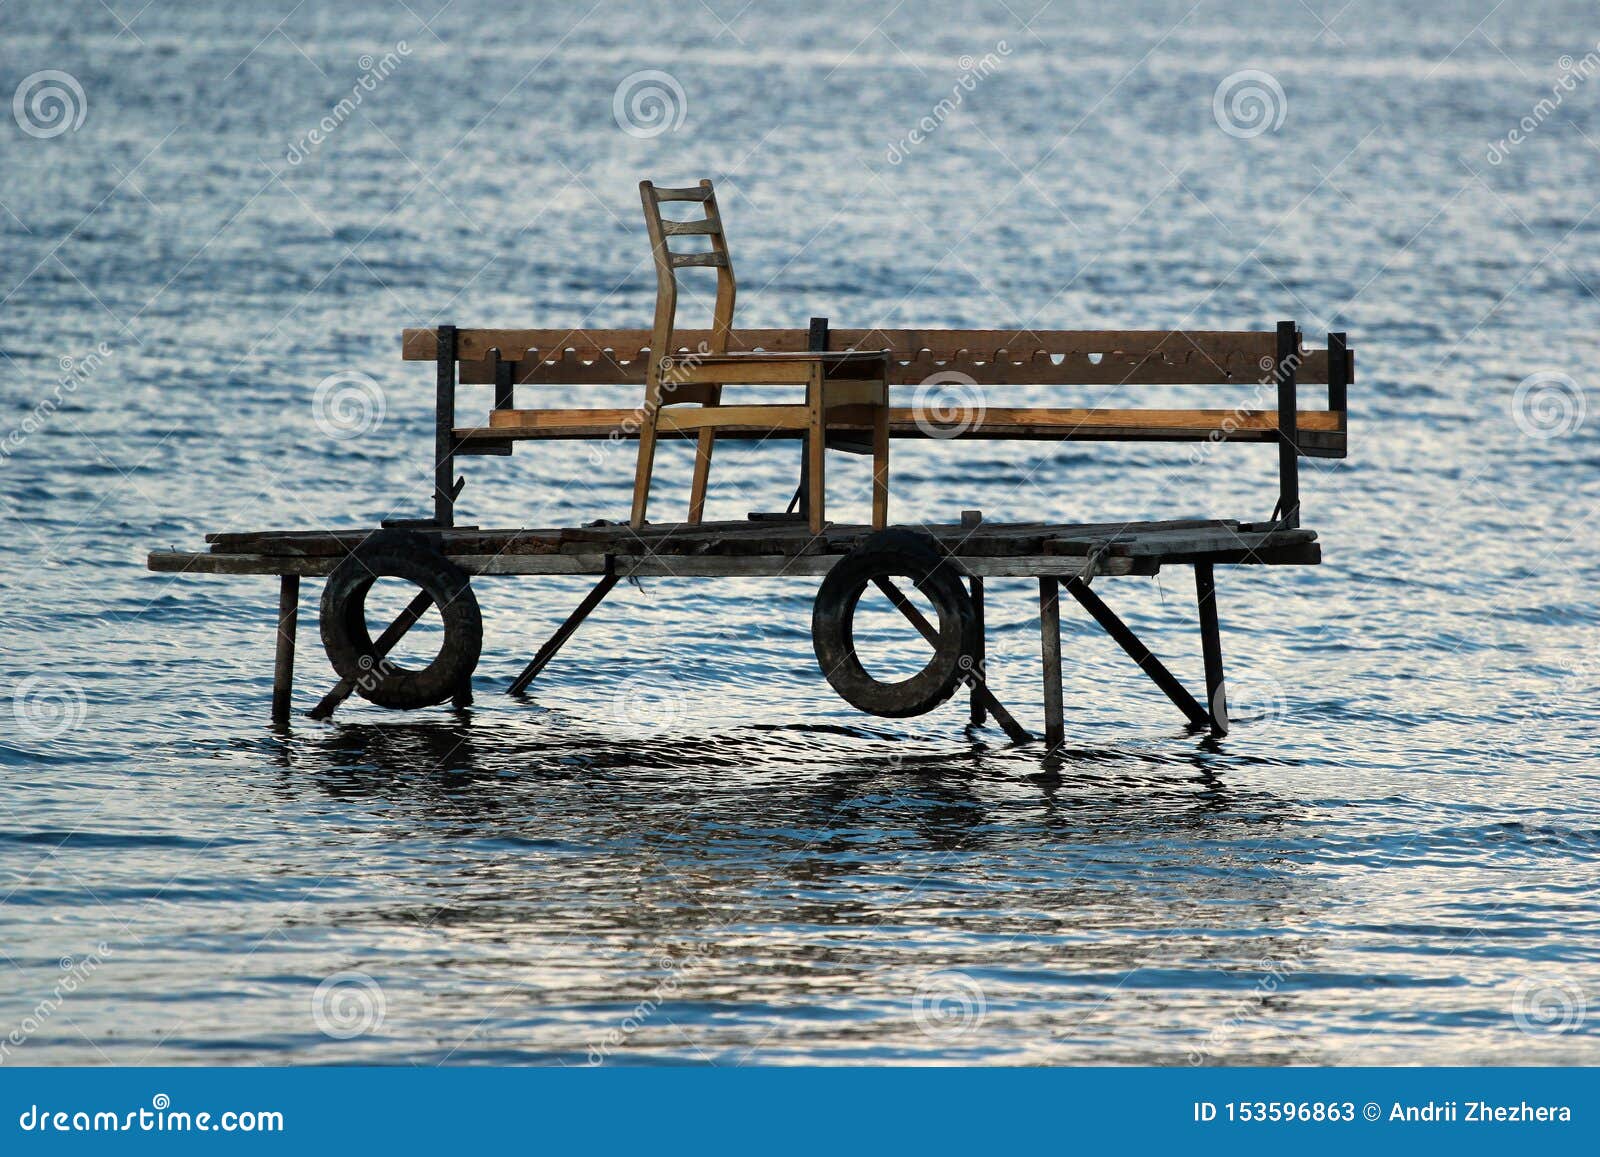 Wooden Fishing Platform in Water, with Tire Fenders and Chair